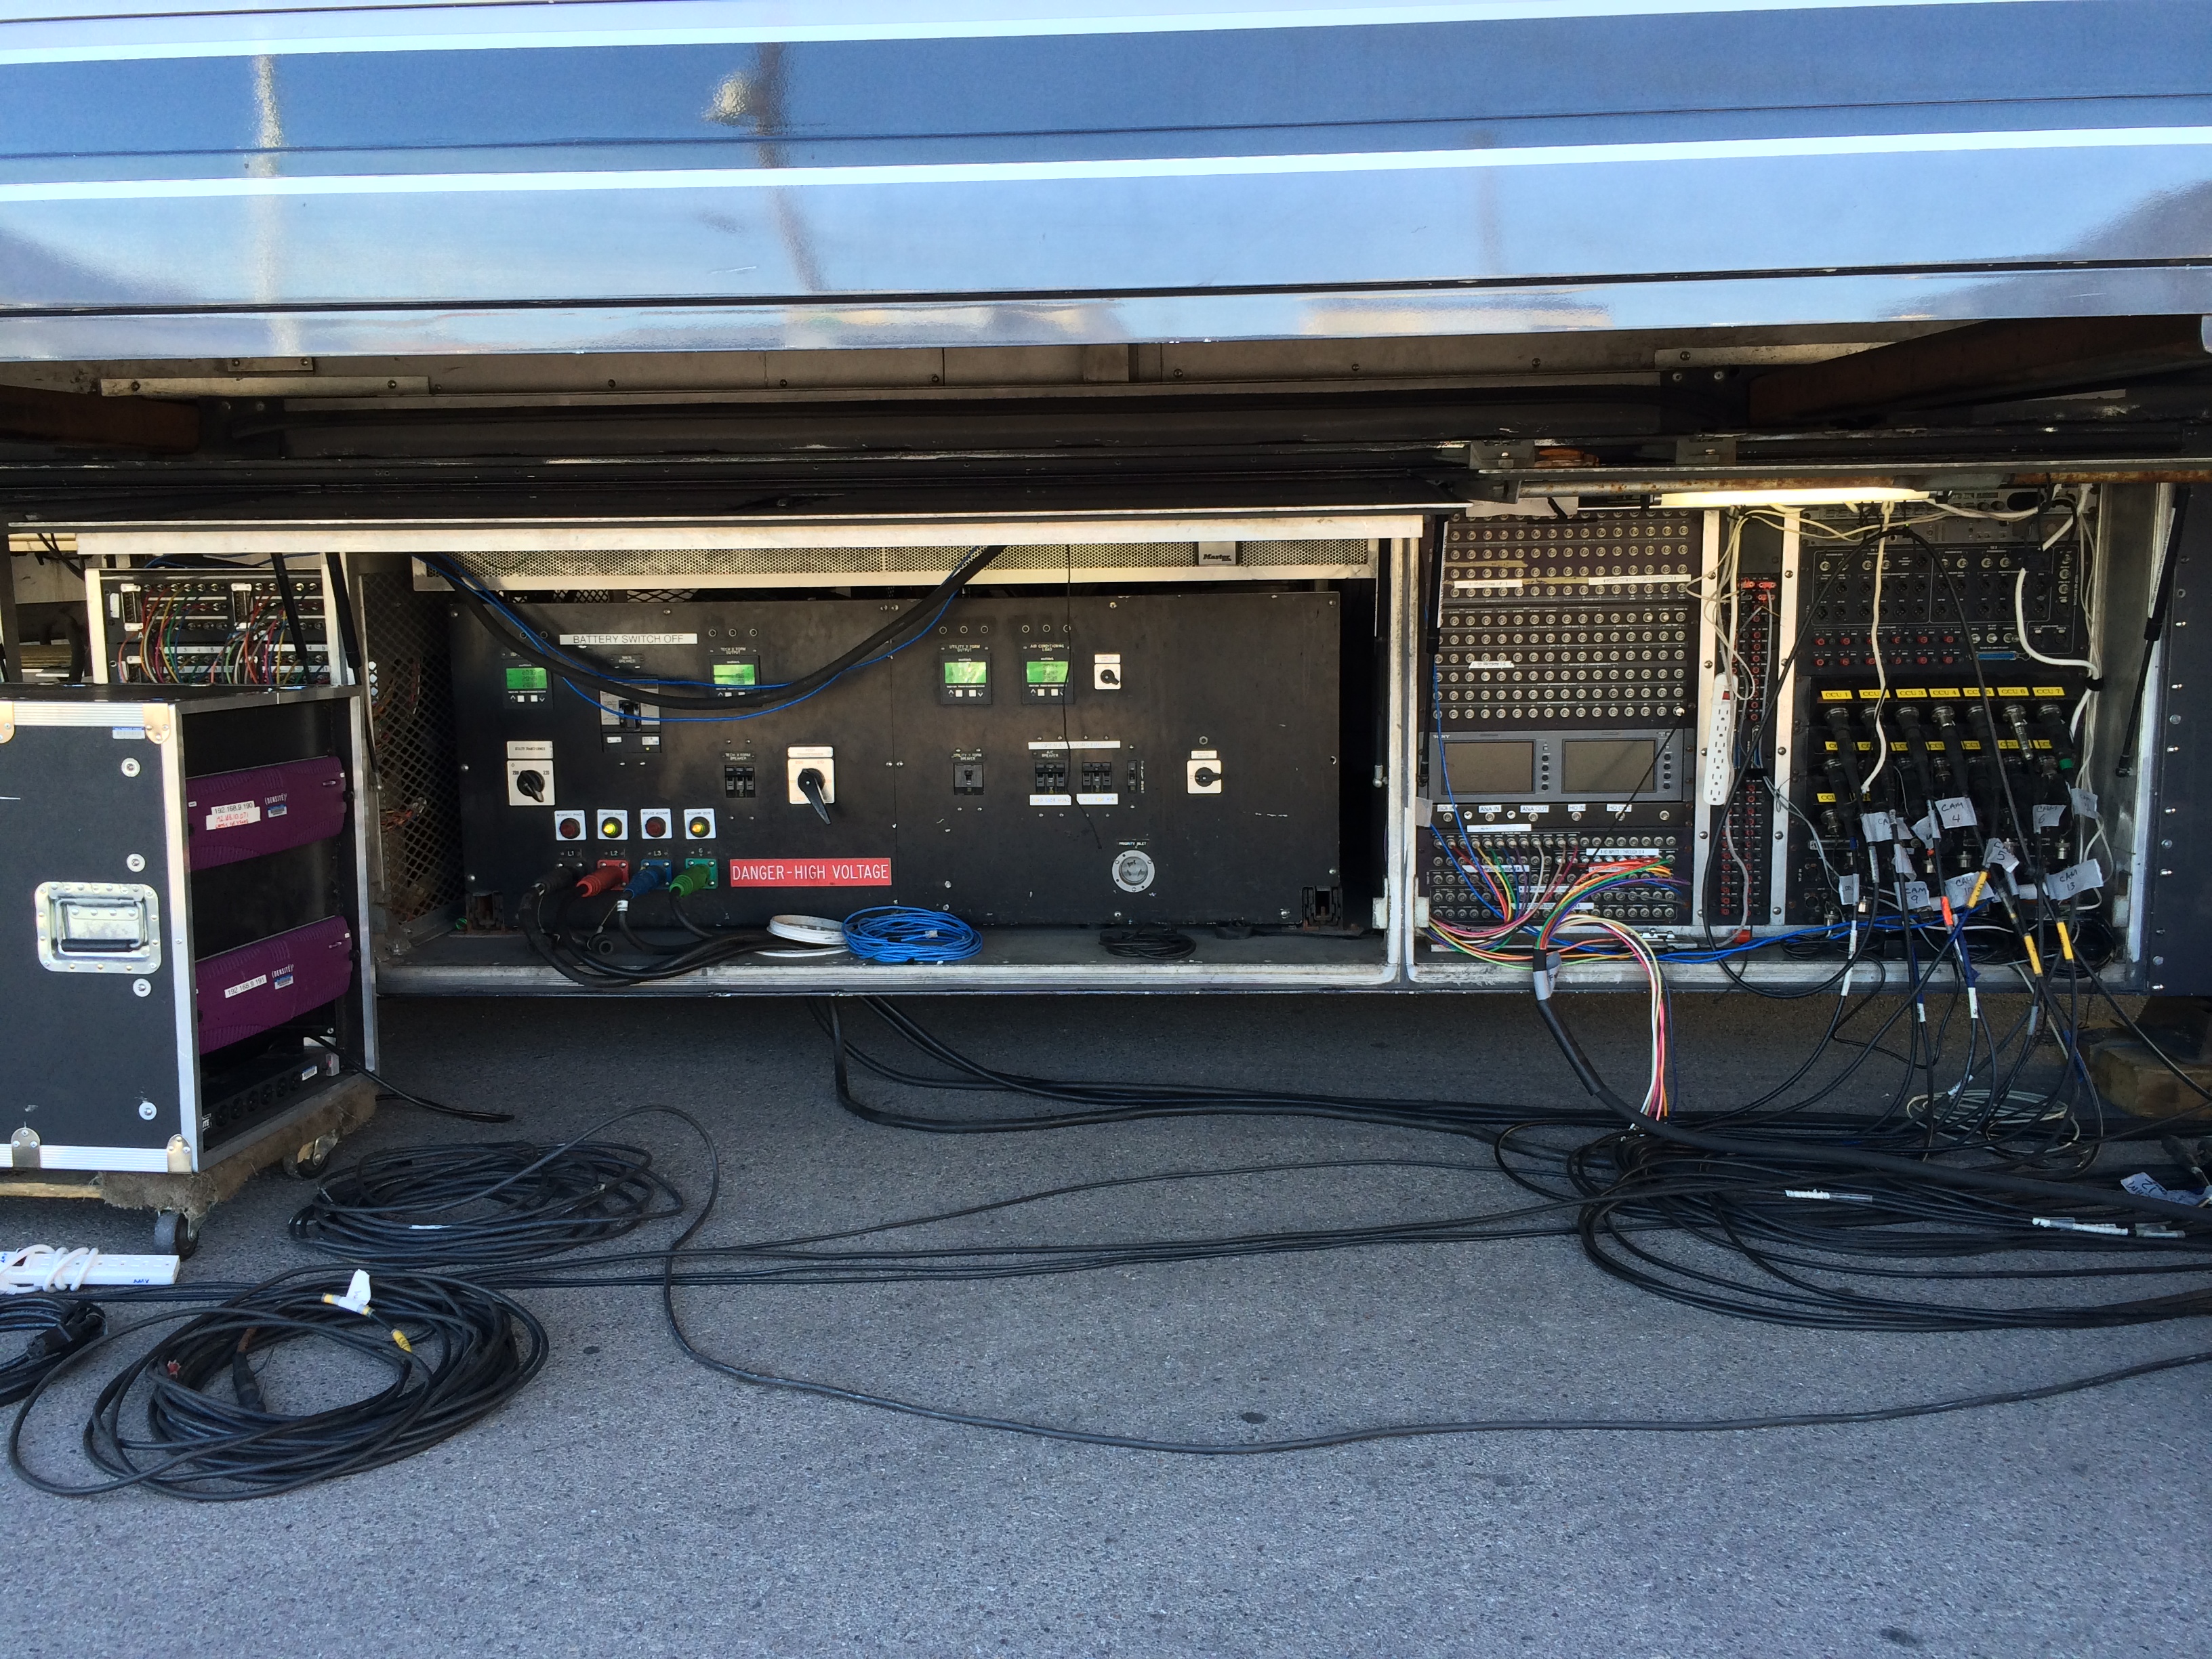 Here’s just one of the very many sections of truck I/O